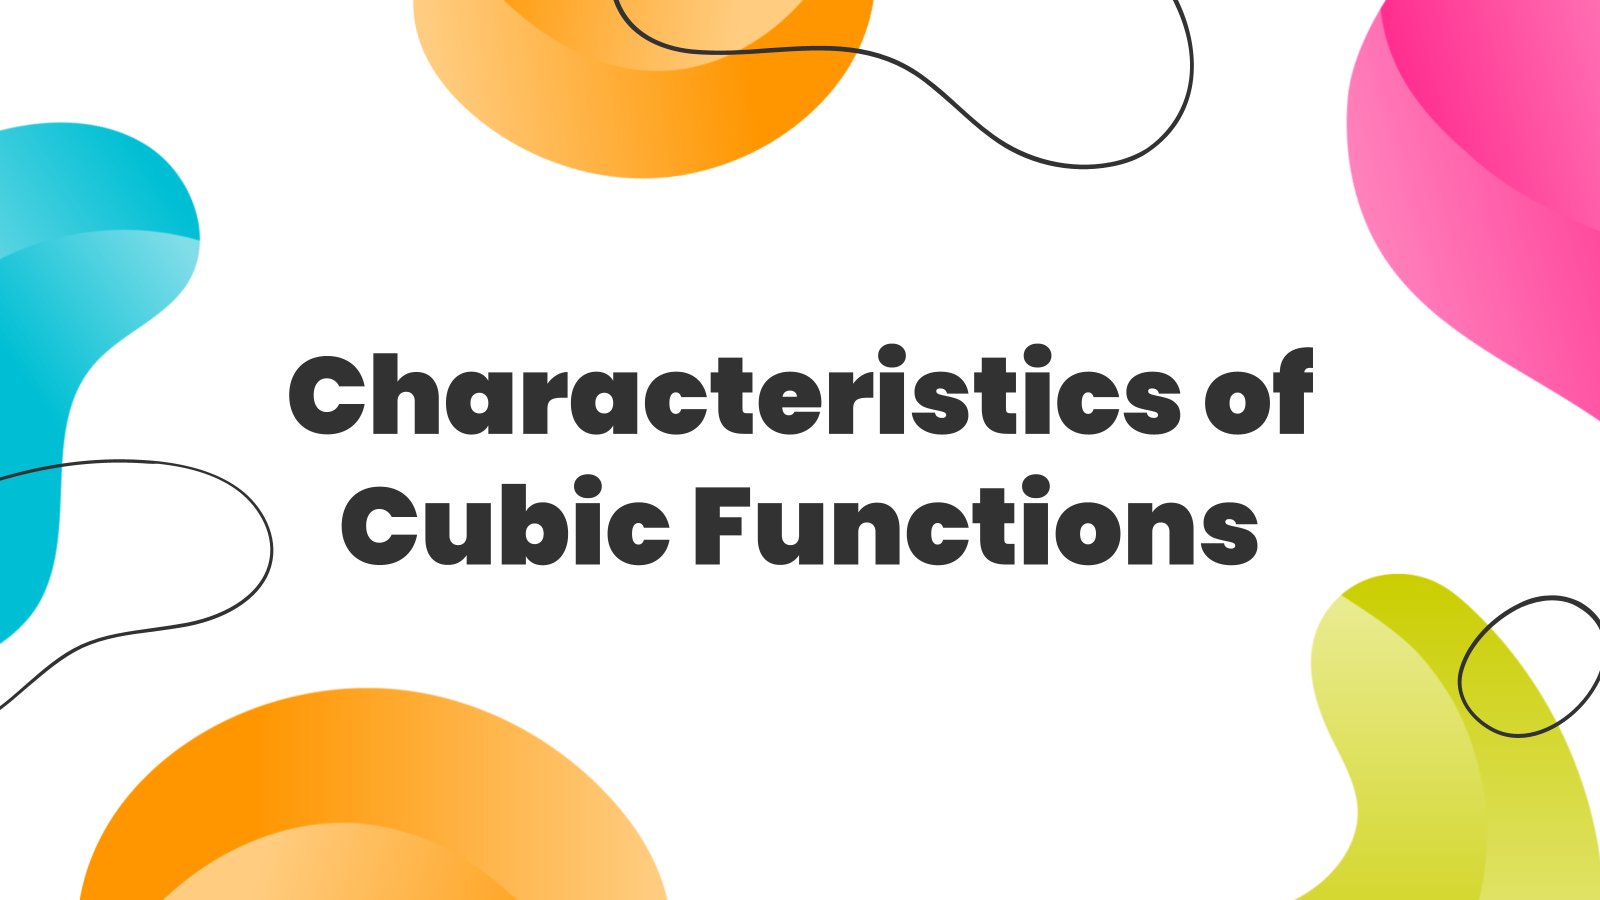 Characteristics of Cubic Functions presentation template 